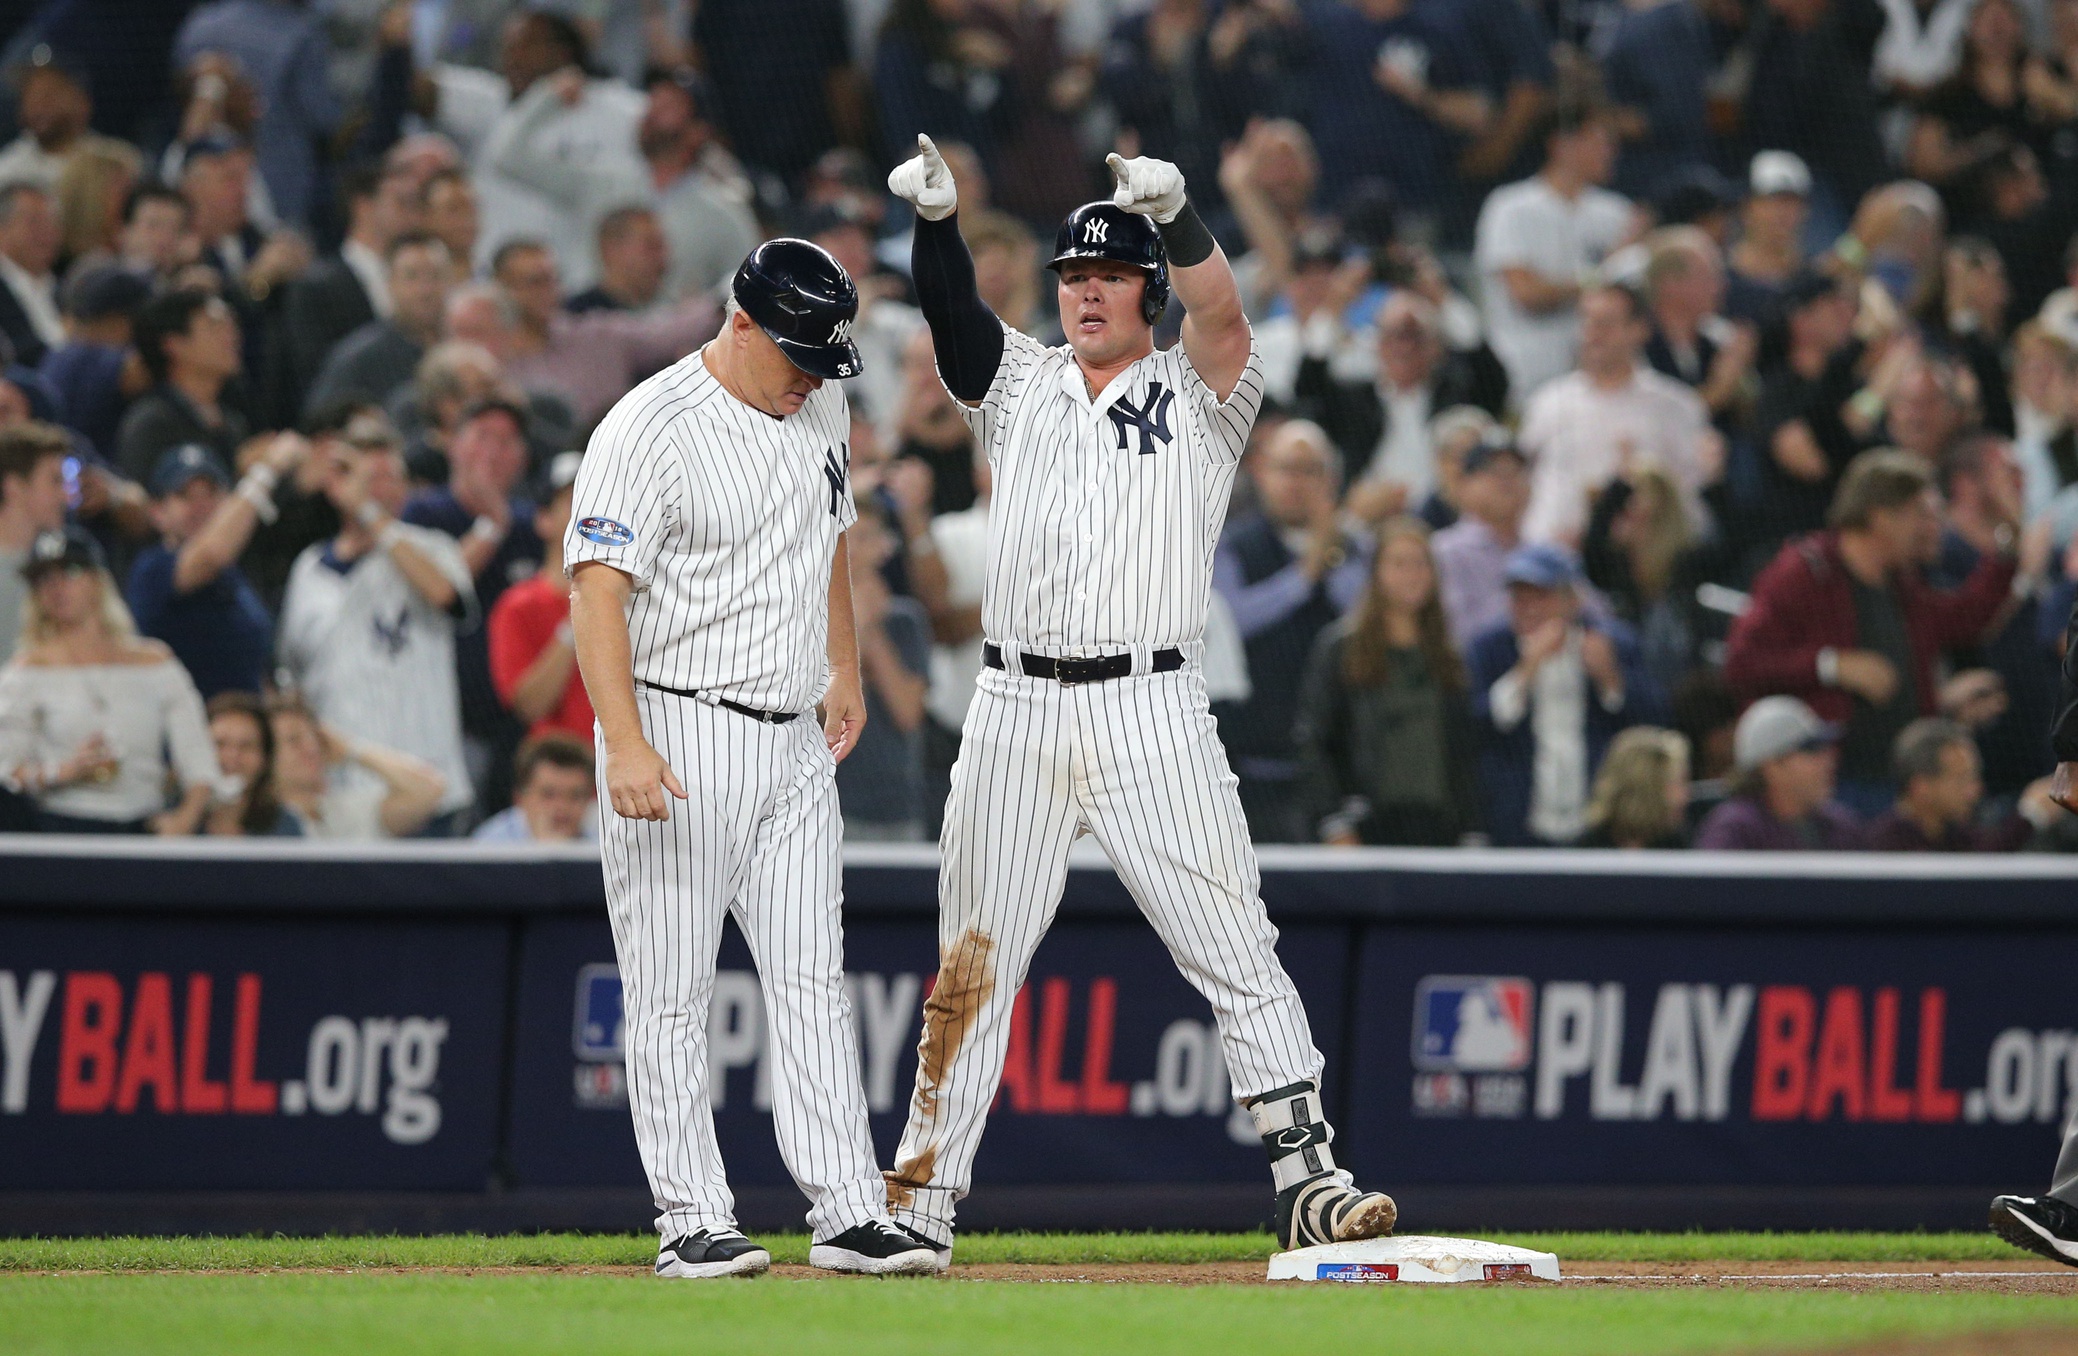 Luke Voit's return after horrendous rehab stint is a desperate move by  Padres